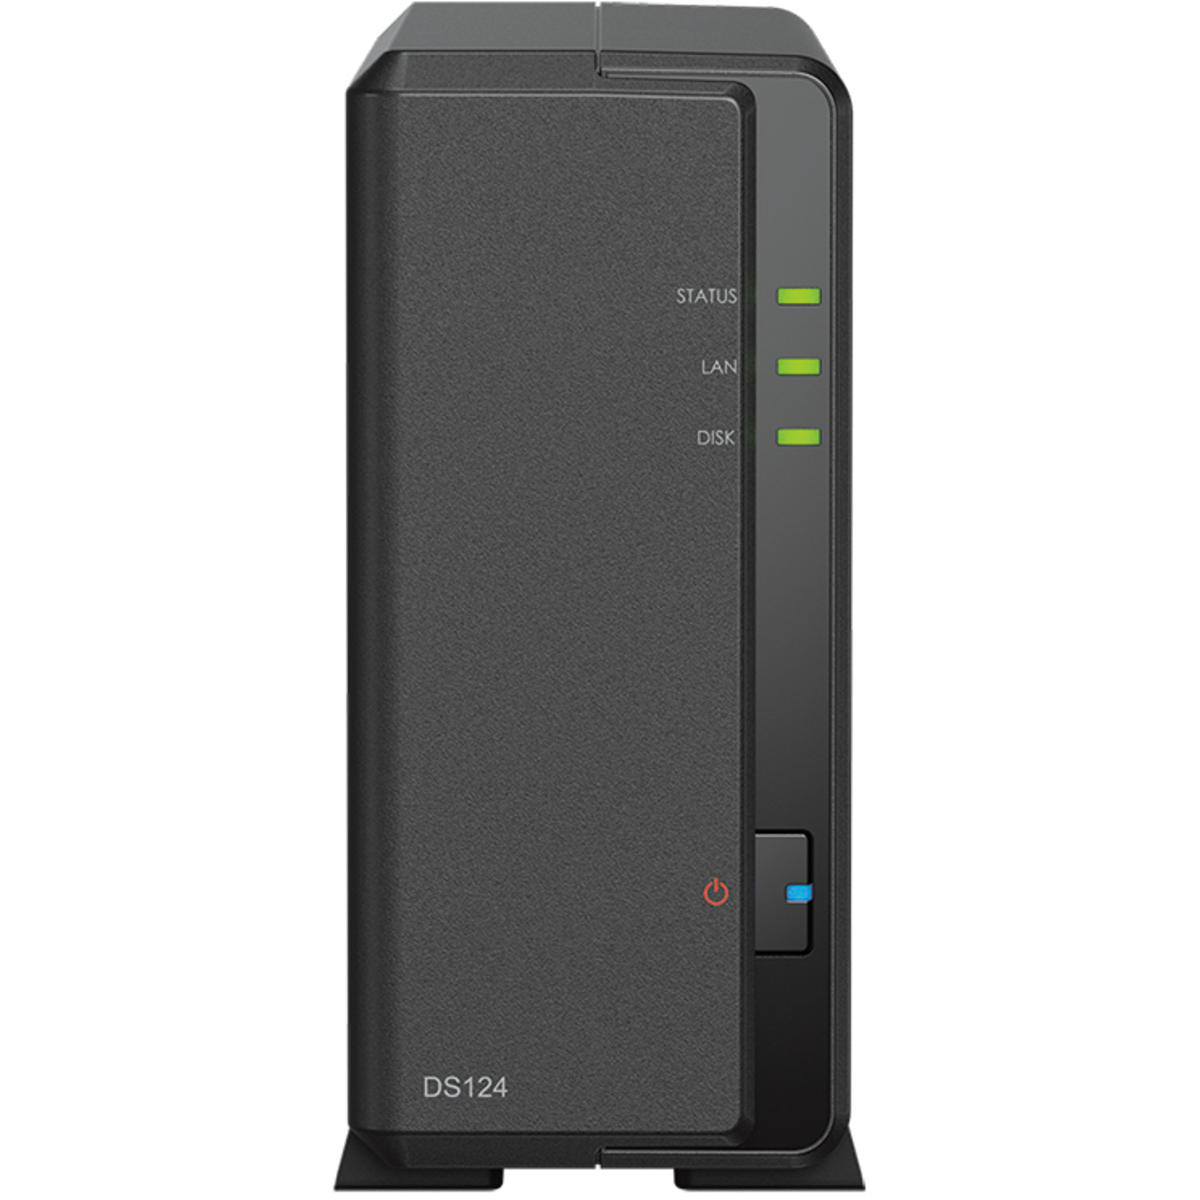 buy $539 Synology DiskStation DS124 12tb Desktop NAS - Network Attached Storage Device 1x12000gb Seagate IronWolf Pro ST12000NT001 3.5 7200rpm SATA 6Gb/s HDD NAS Class Drives Installed - Burn-In Tested - nas headquarters buy network attached storage server device das new raid-5 free shipping simply usa DiskStation DS124